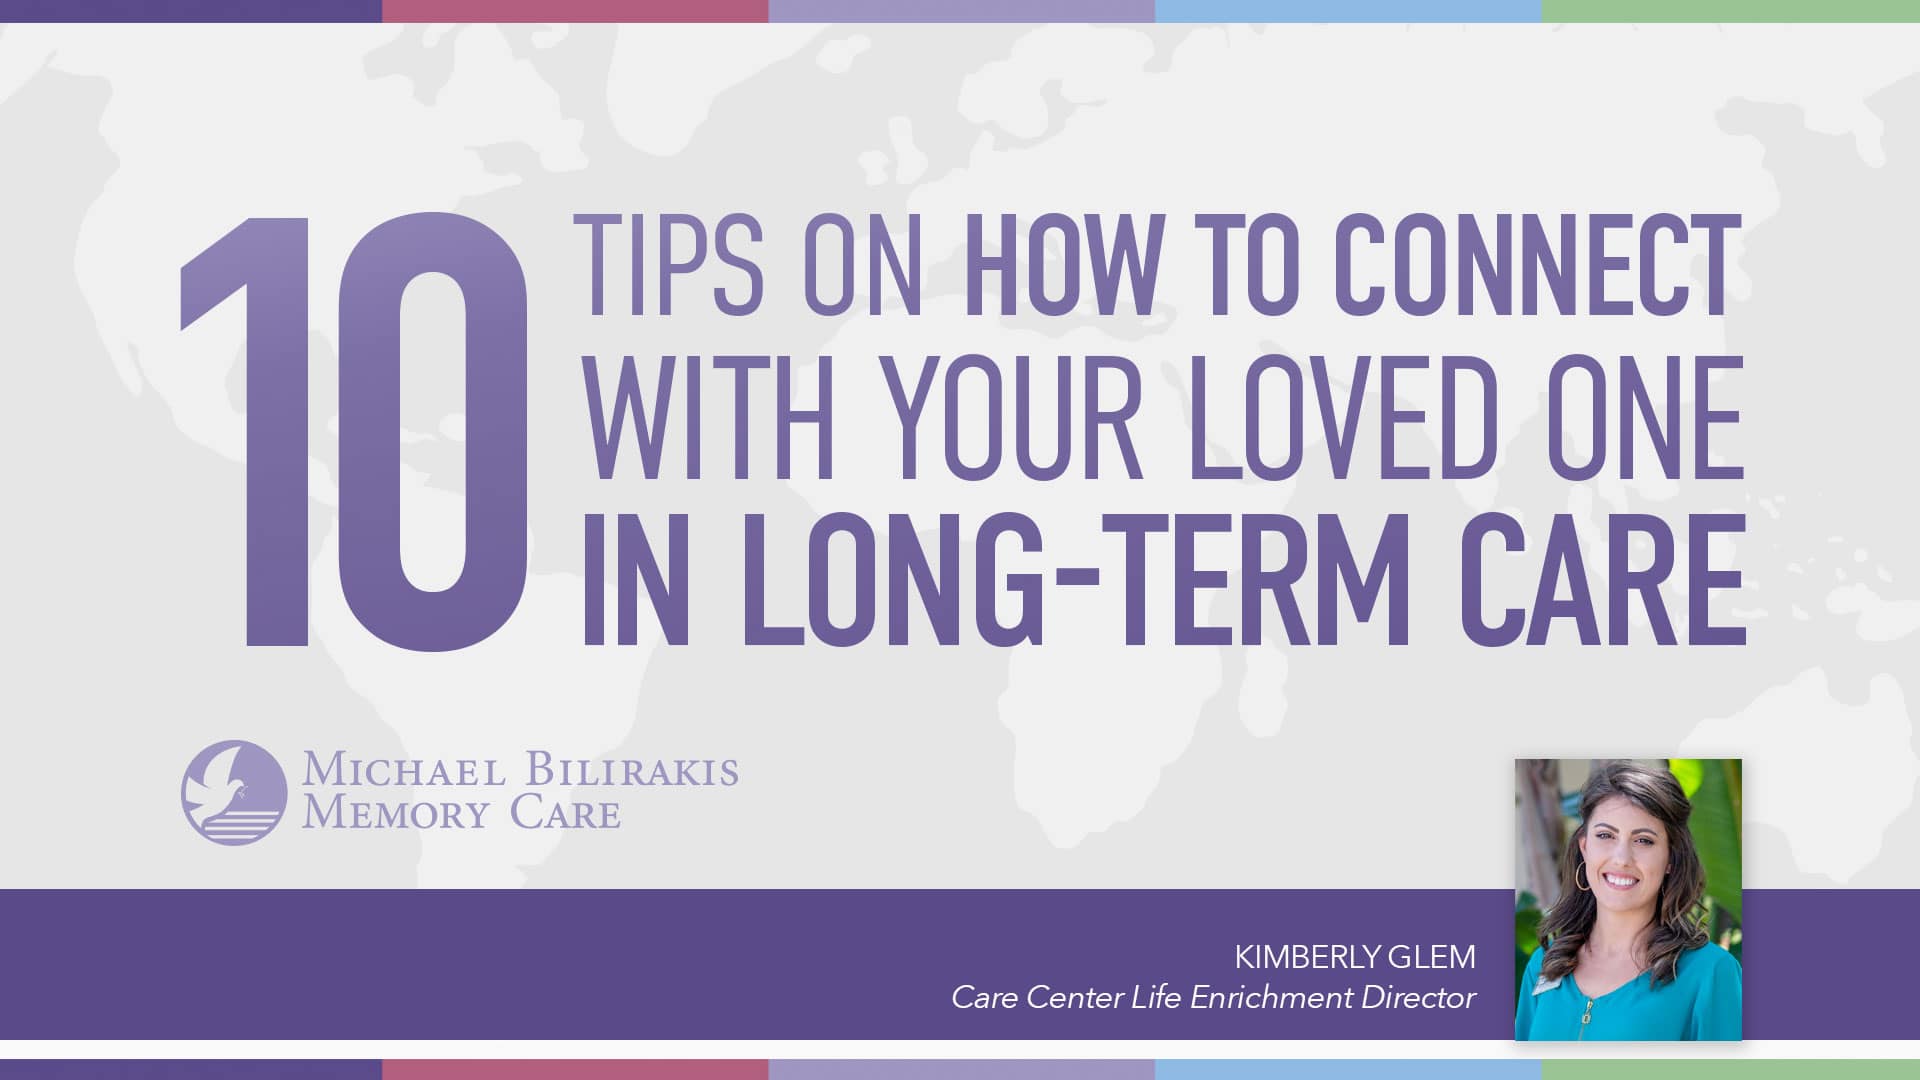 10 tips on how to connect with your loved one in long-term care.